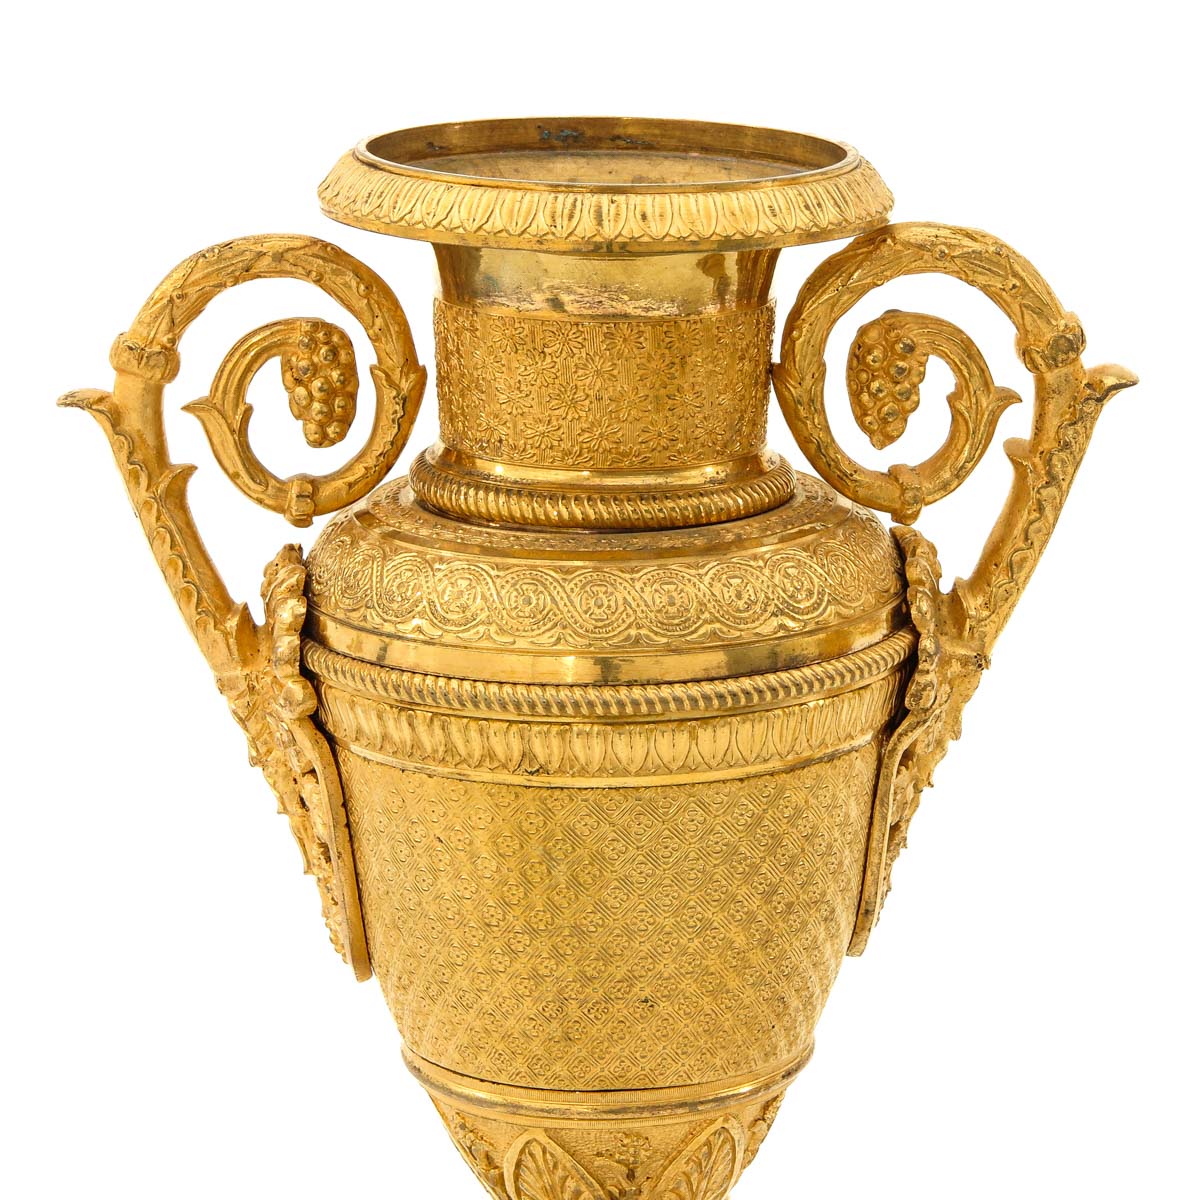 A Pair of Empire Period Vases - Image 7 of 10